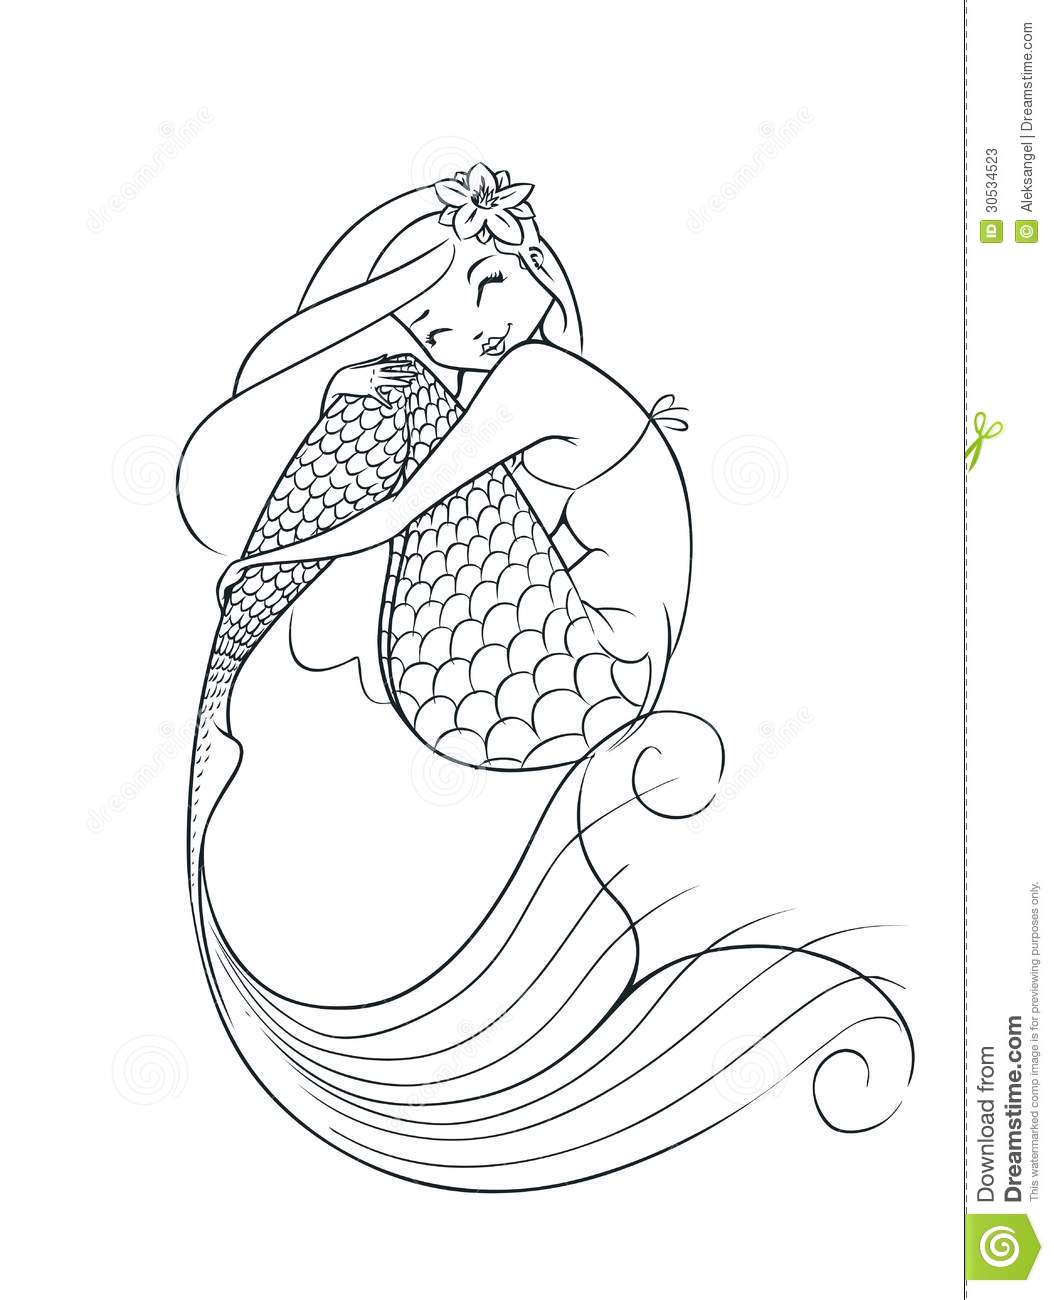 Mermaid Outline Clipart Images   Pictures   Becuo